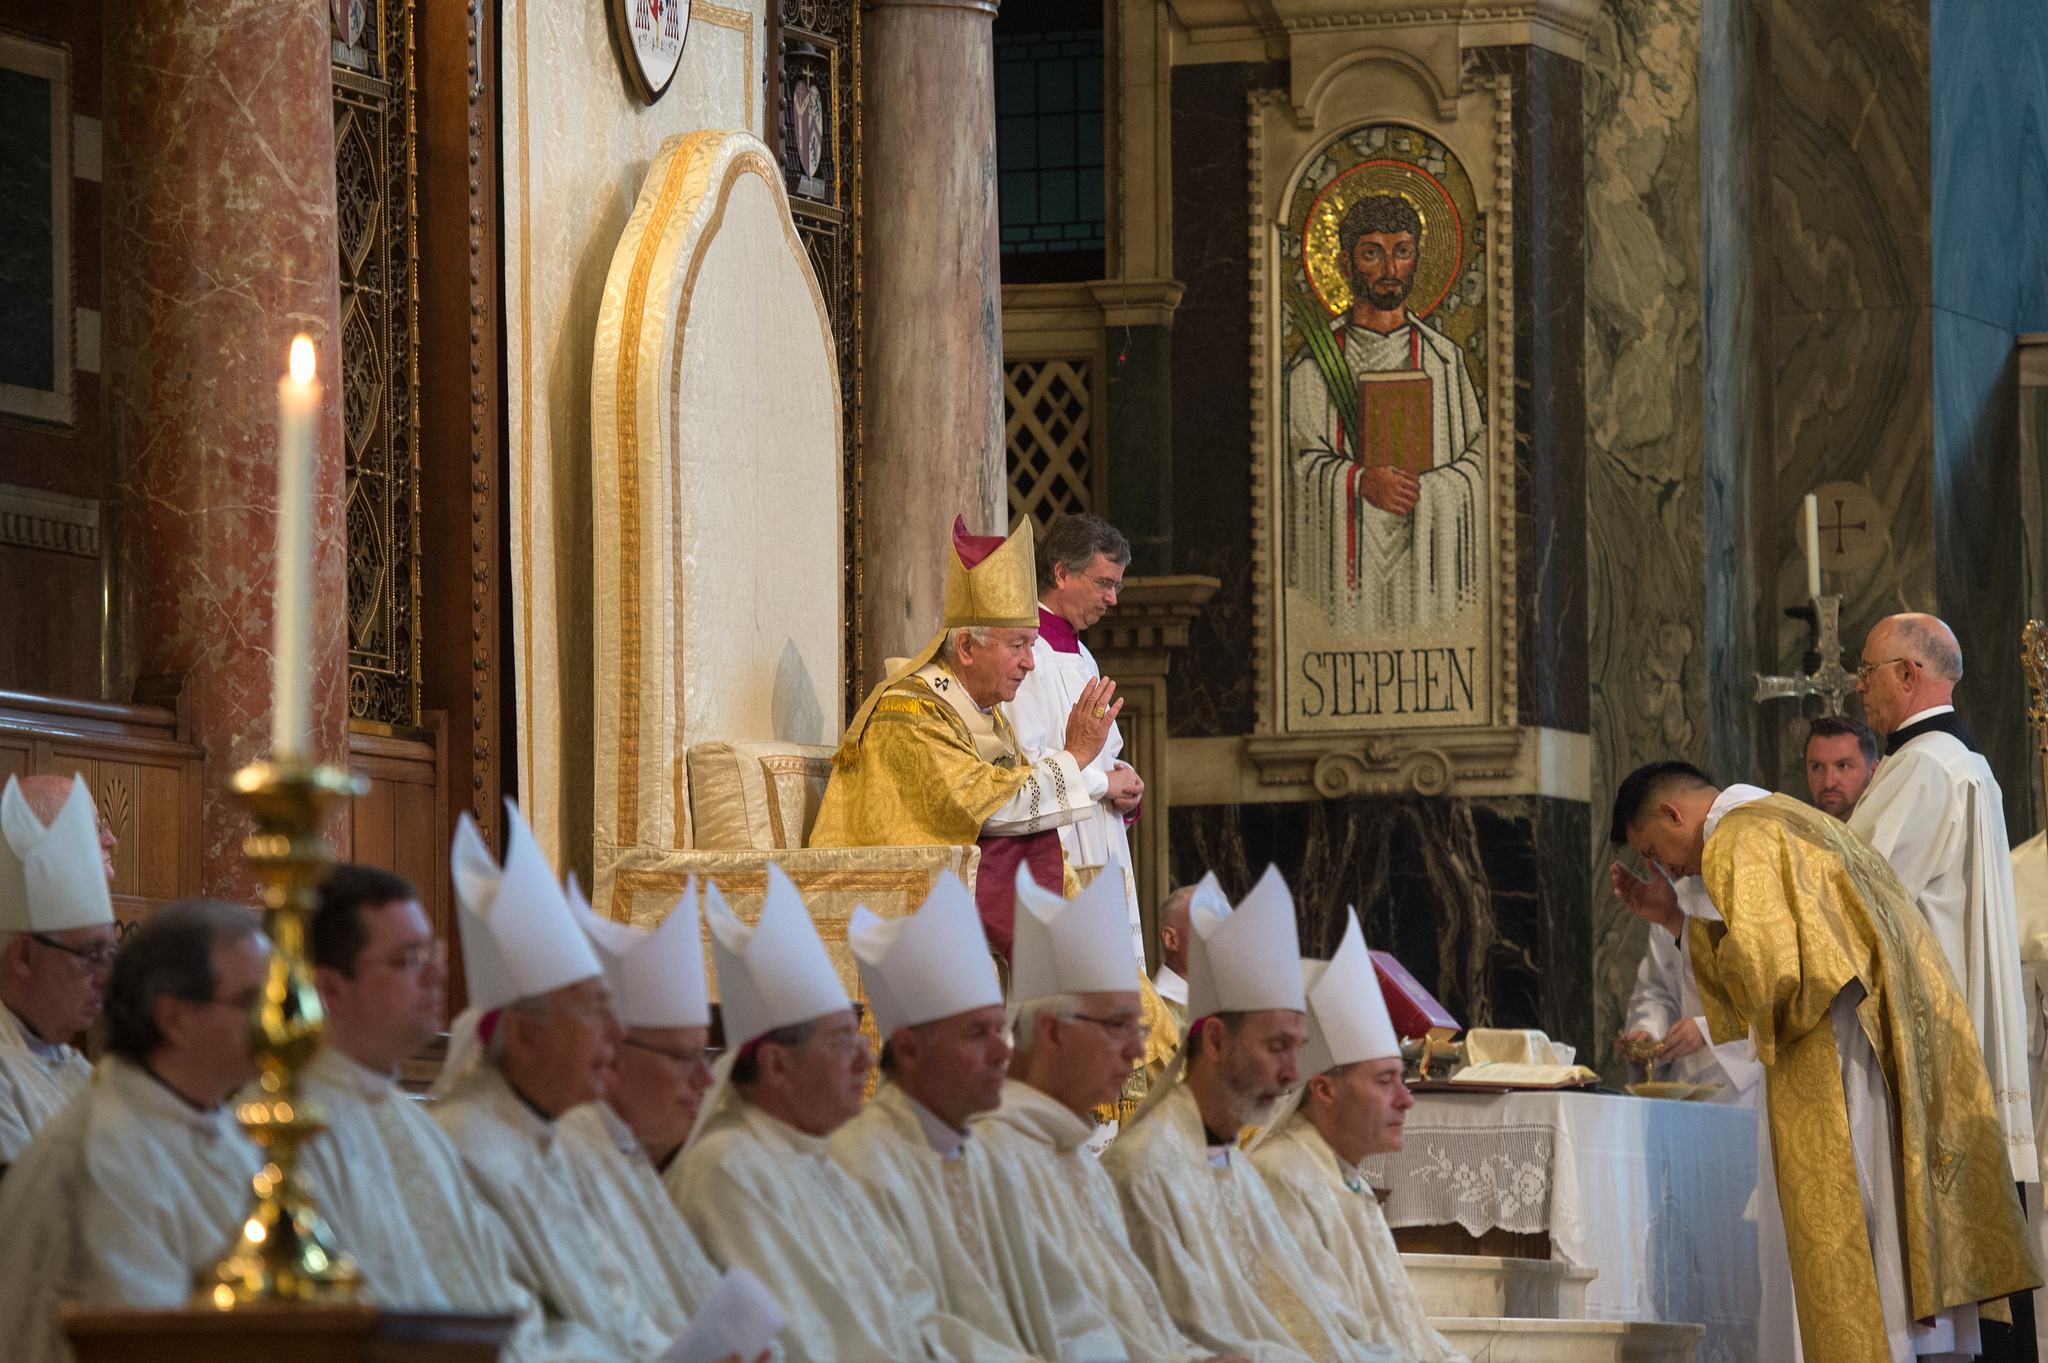 Cardinal gives candid talk about the challenges of priesthood